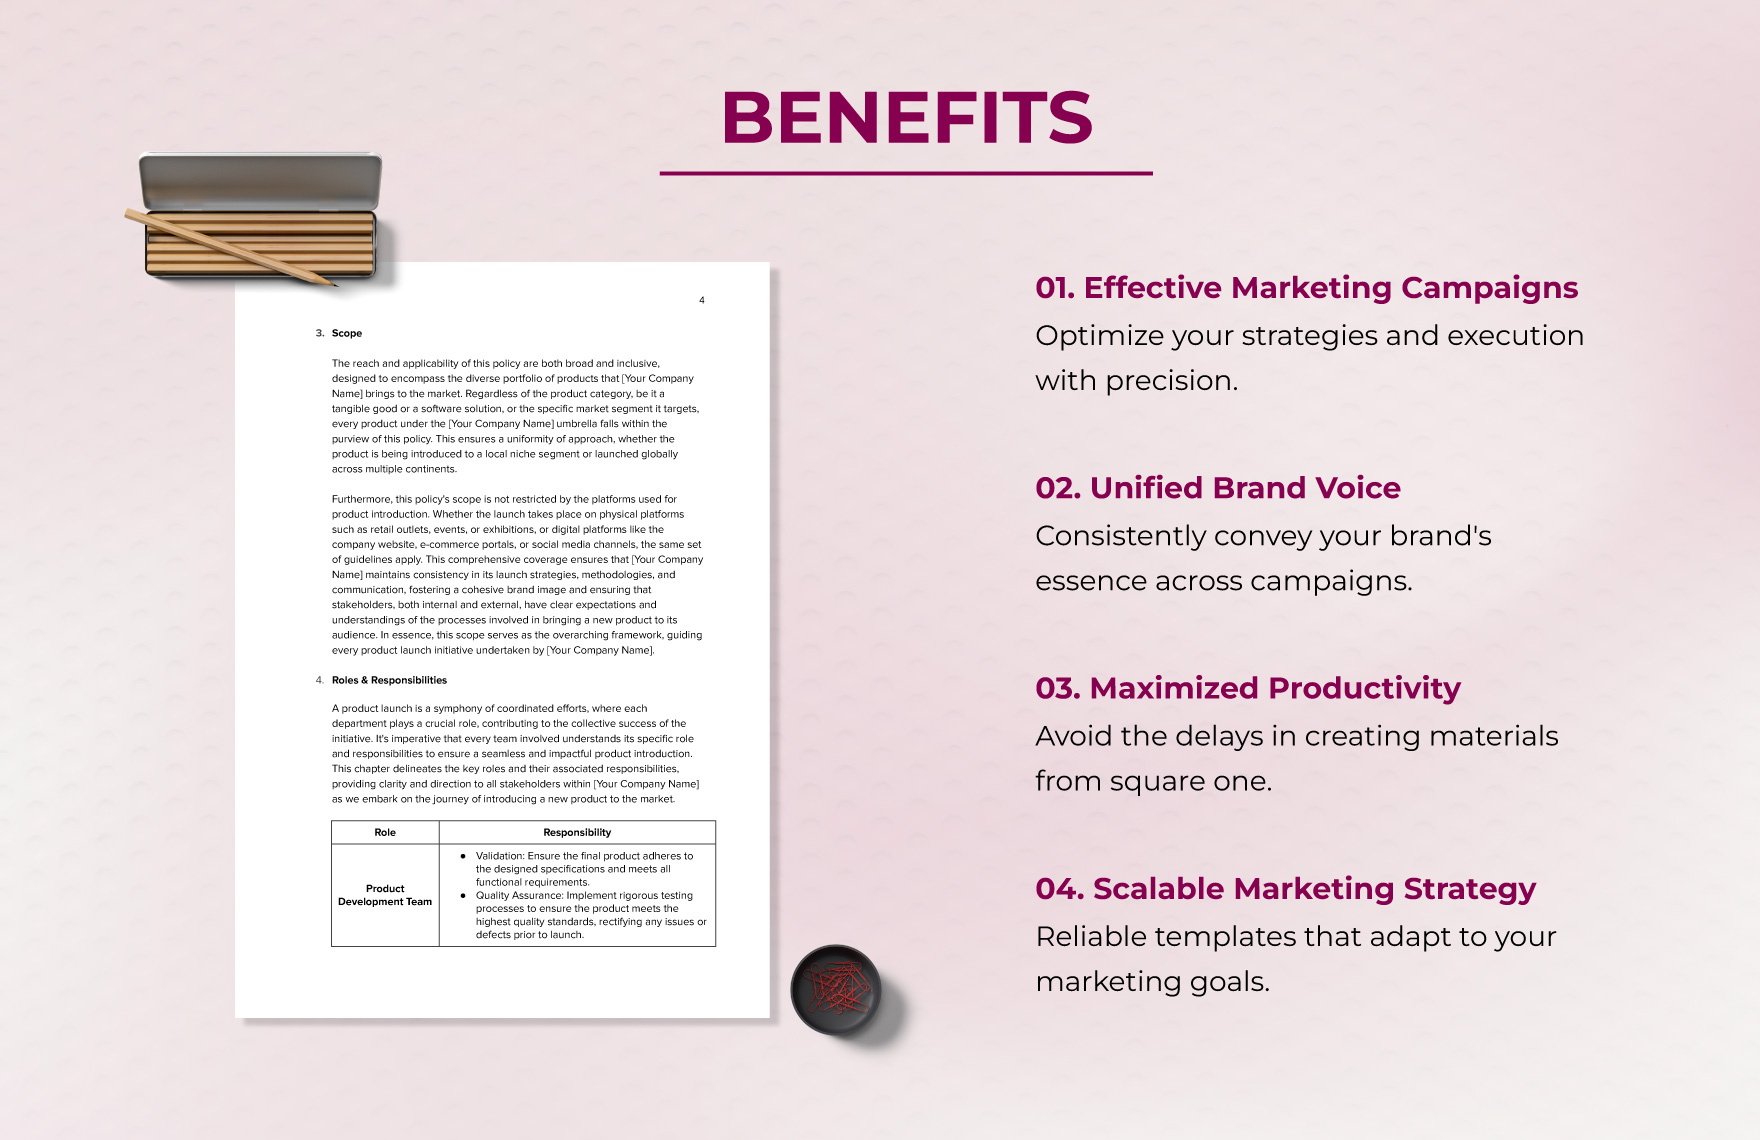 Marketing Policy & Procedure for Launching Products Template